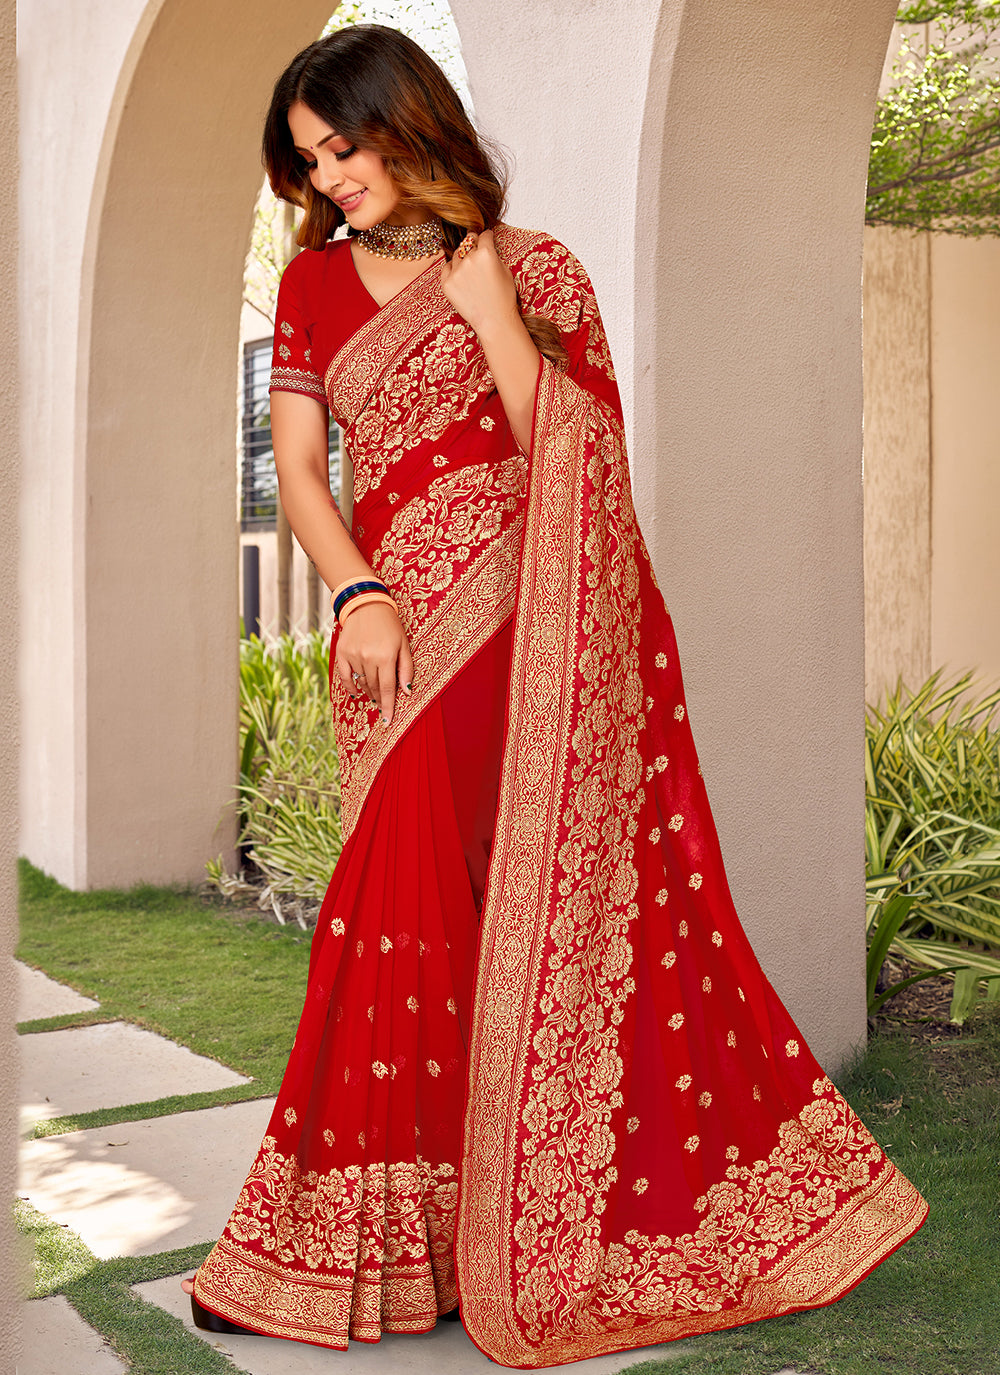 Red Embroidered Classic Saree